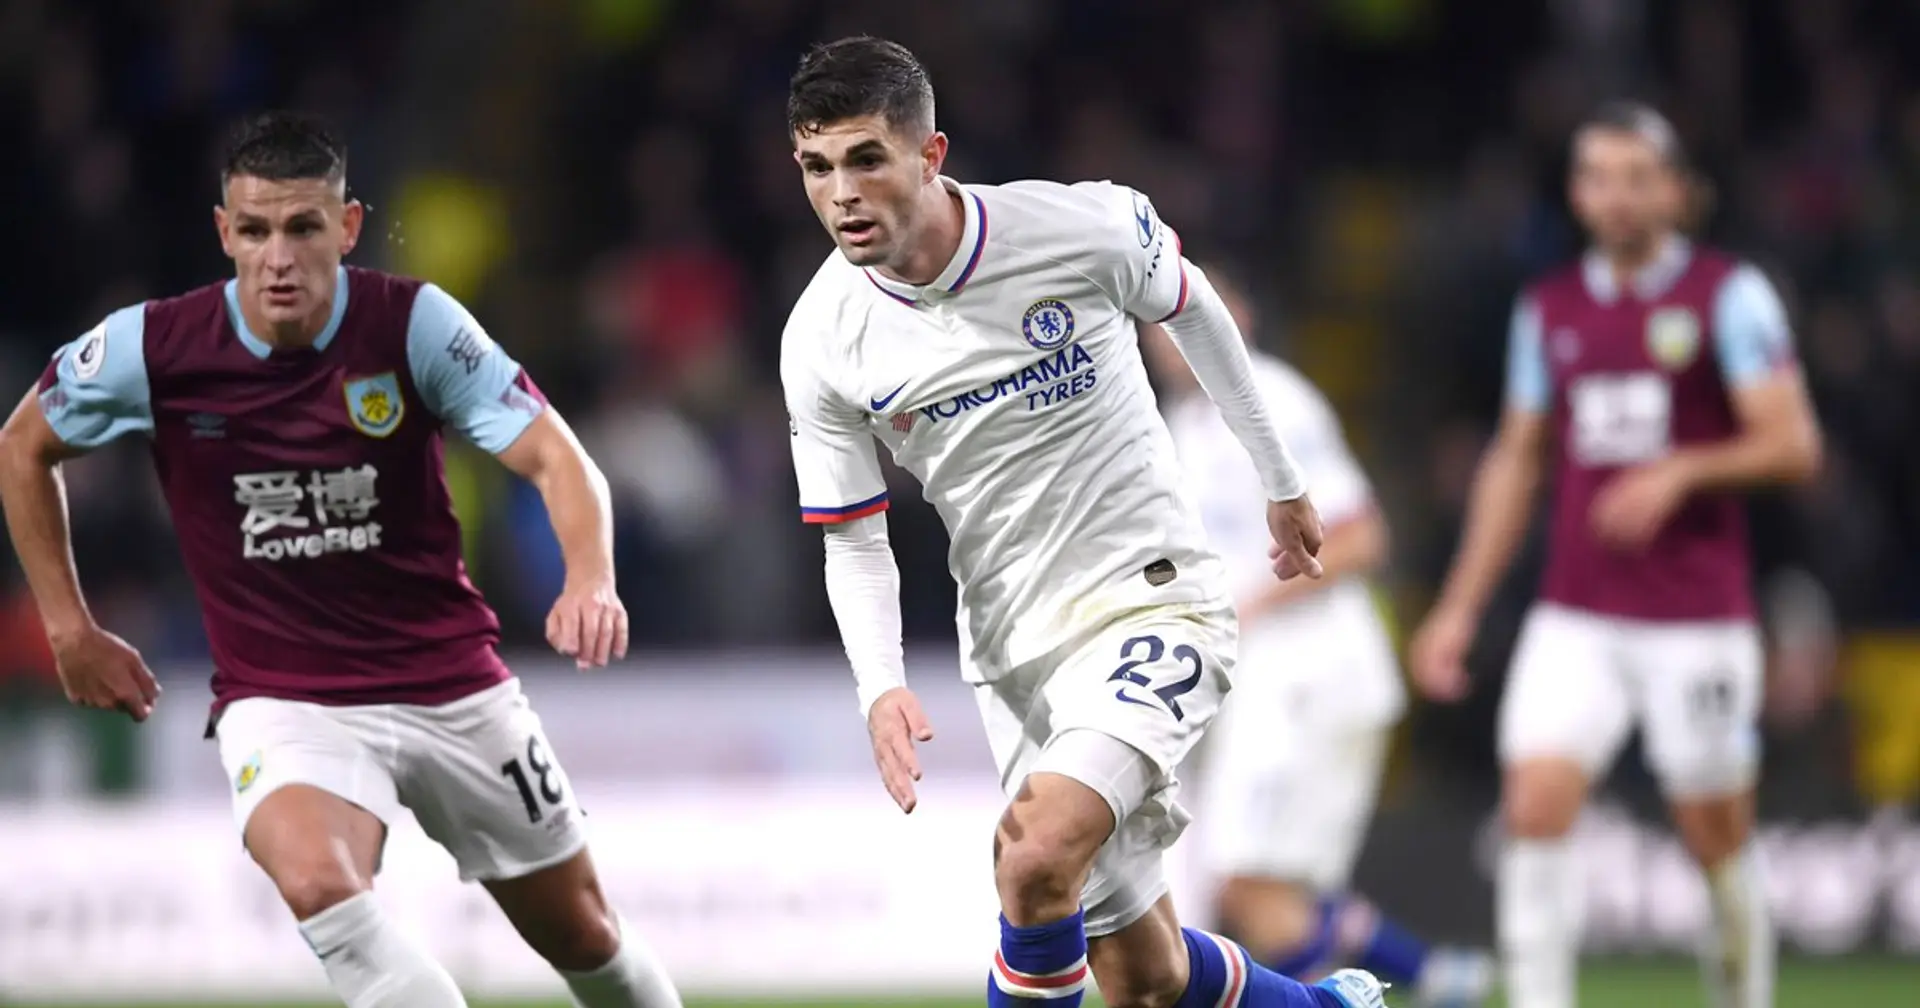 Burnley vs Chelsea: Team news, probable line-ups, score predictions and more - preview